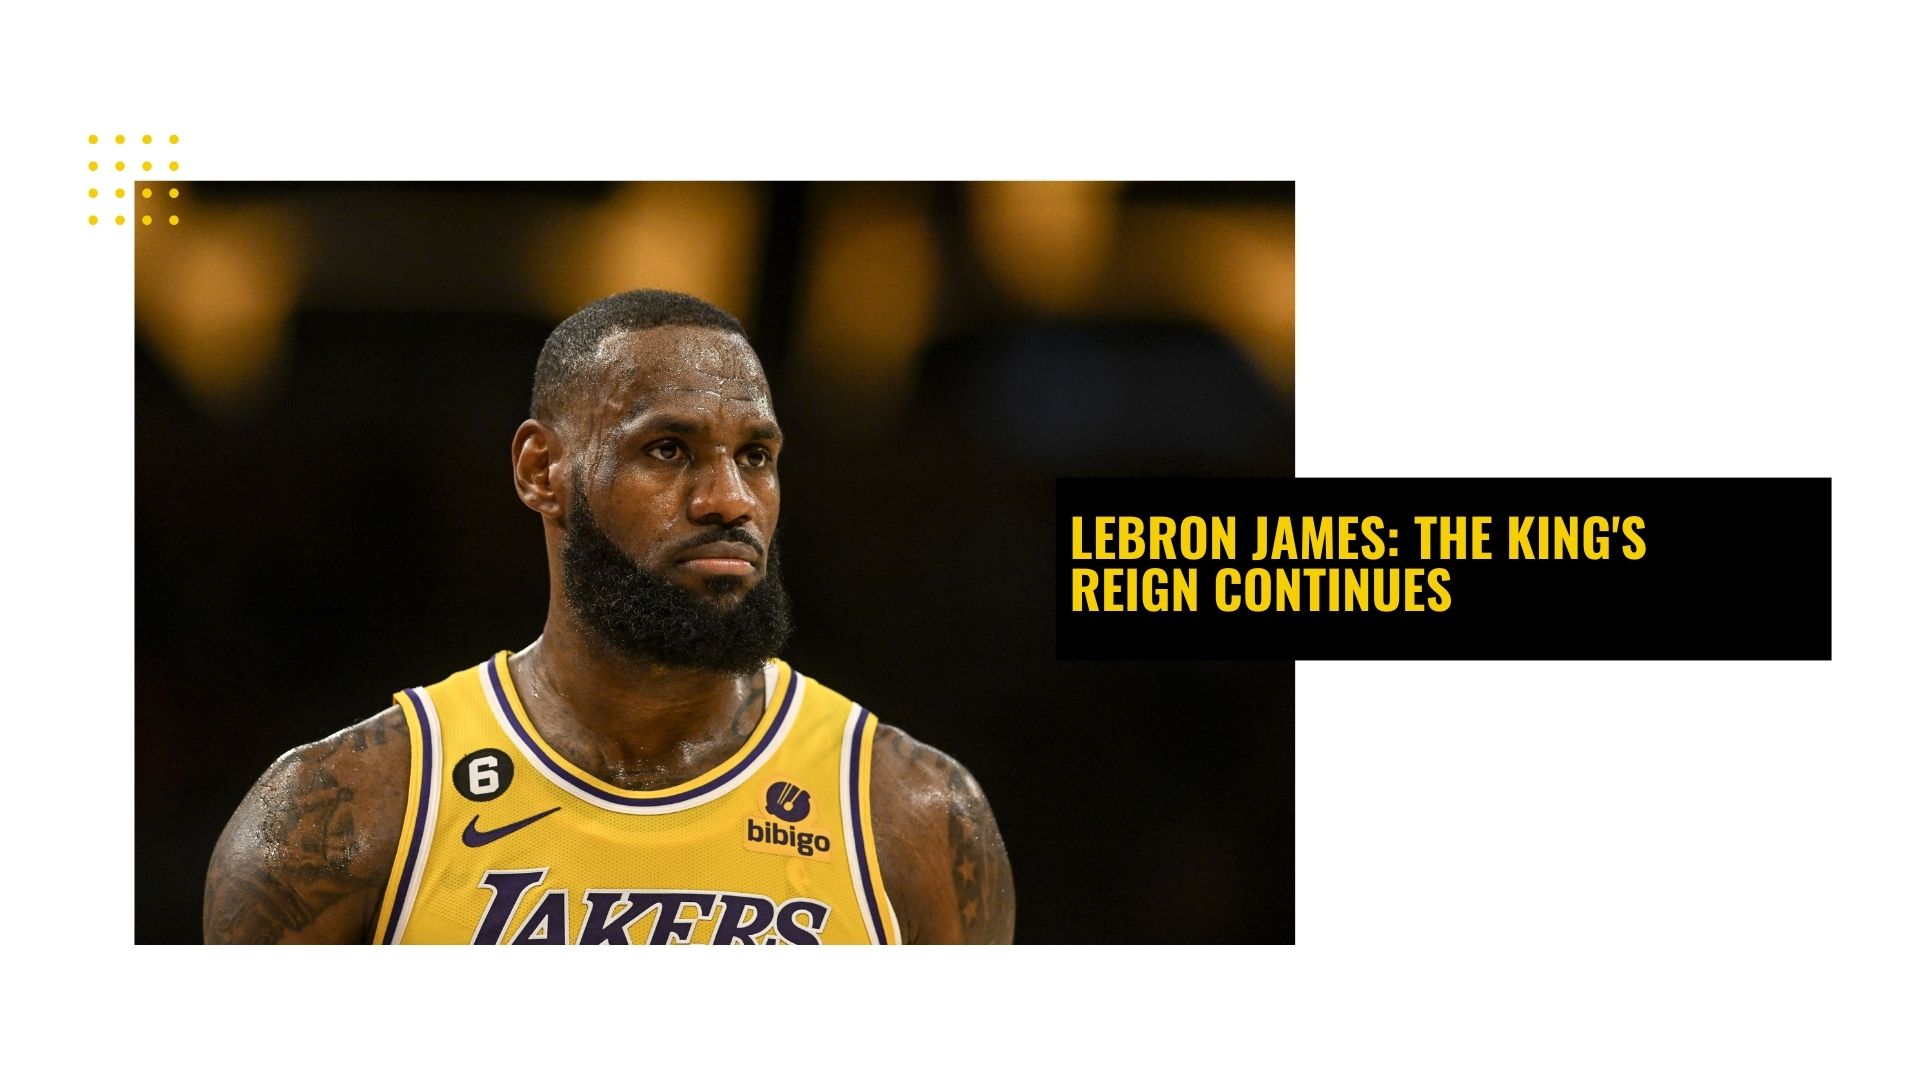 LeBron James: The King's Reign Continues